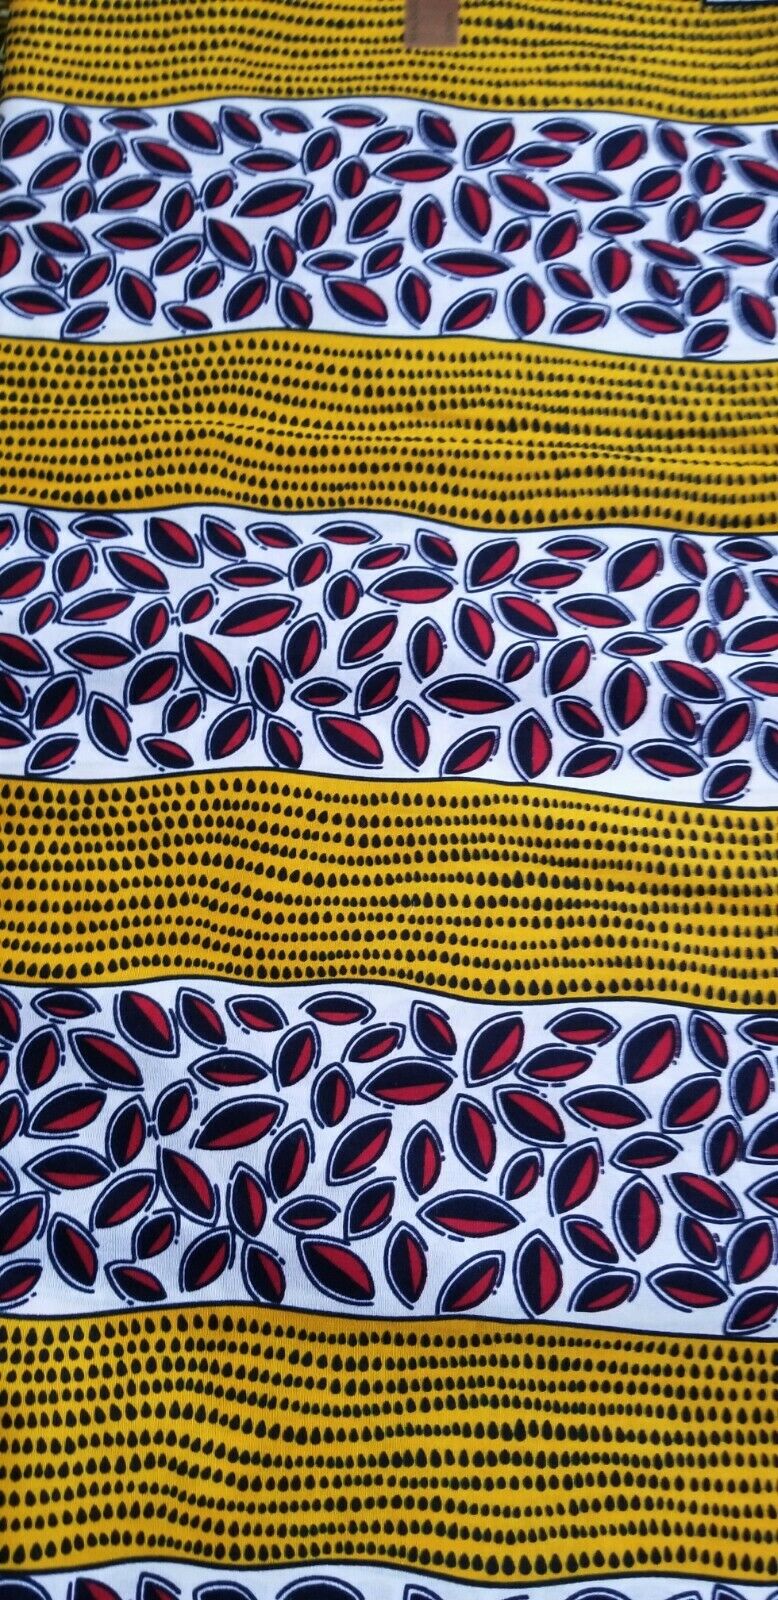 Jungle Fever Multi African fabric 100% Cotton 2 yards~select your choice